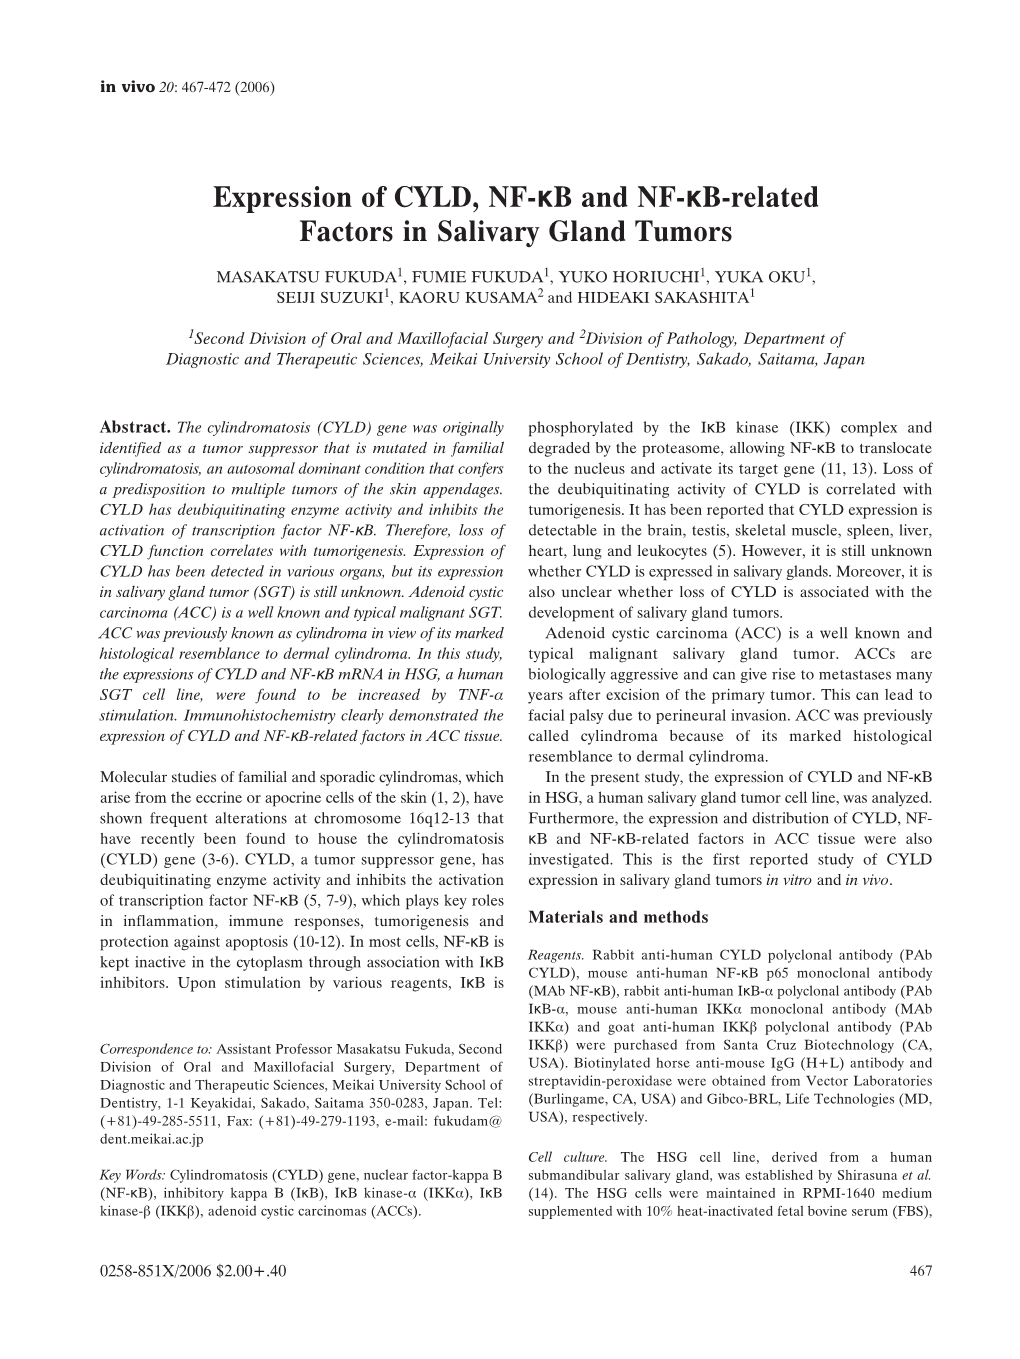 Expression of CYLD, NF-Κb and NF-Κb-Related Factors in Salivary Gland Tumors